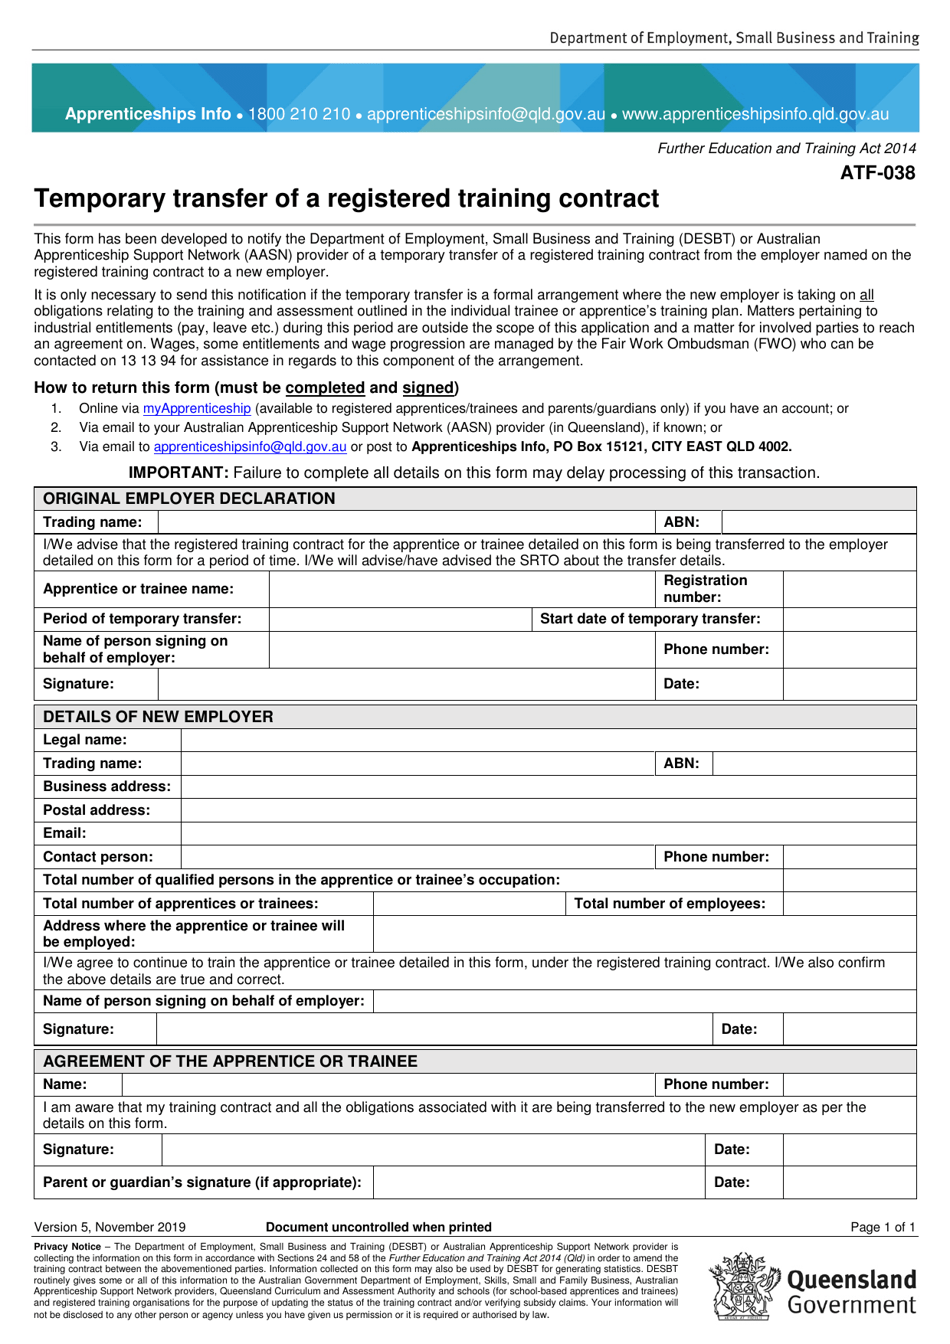 Form ATF-038 Temporary Transfer of a Registered Training Contract - Queensland, Australia, Page 1